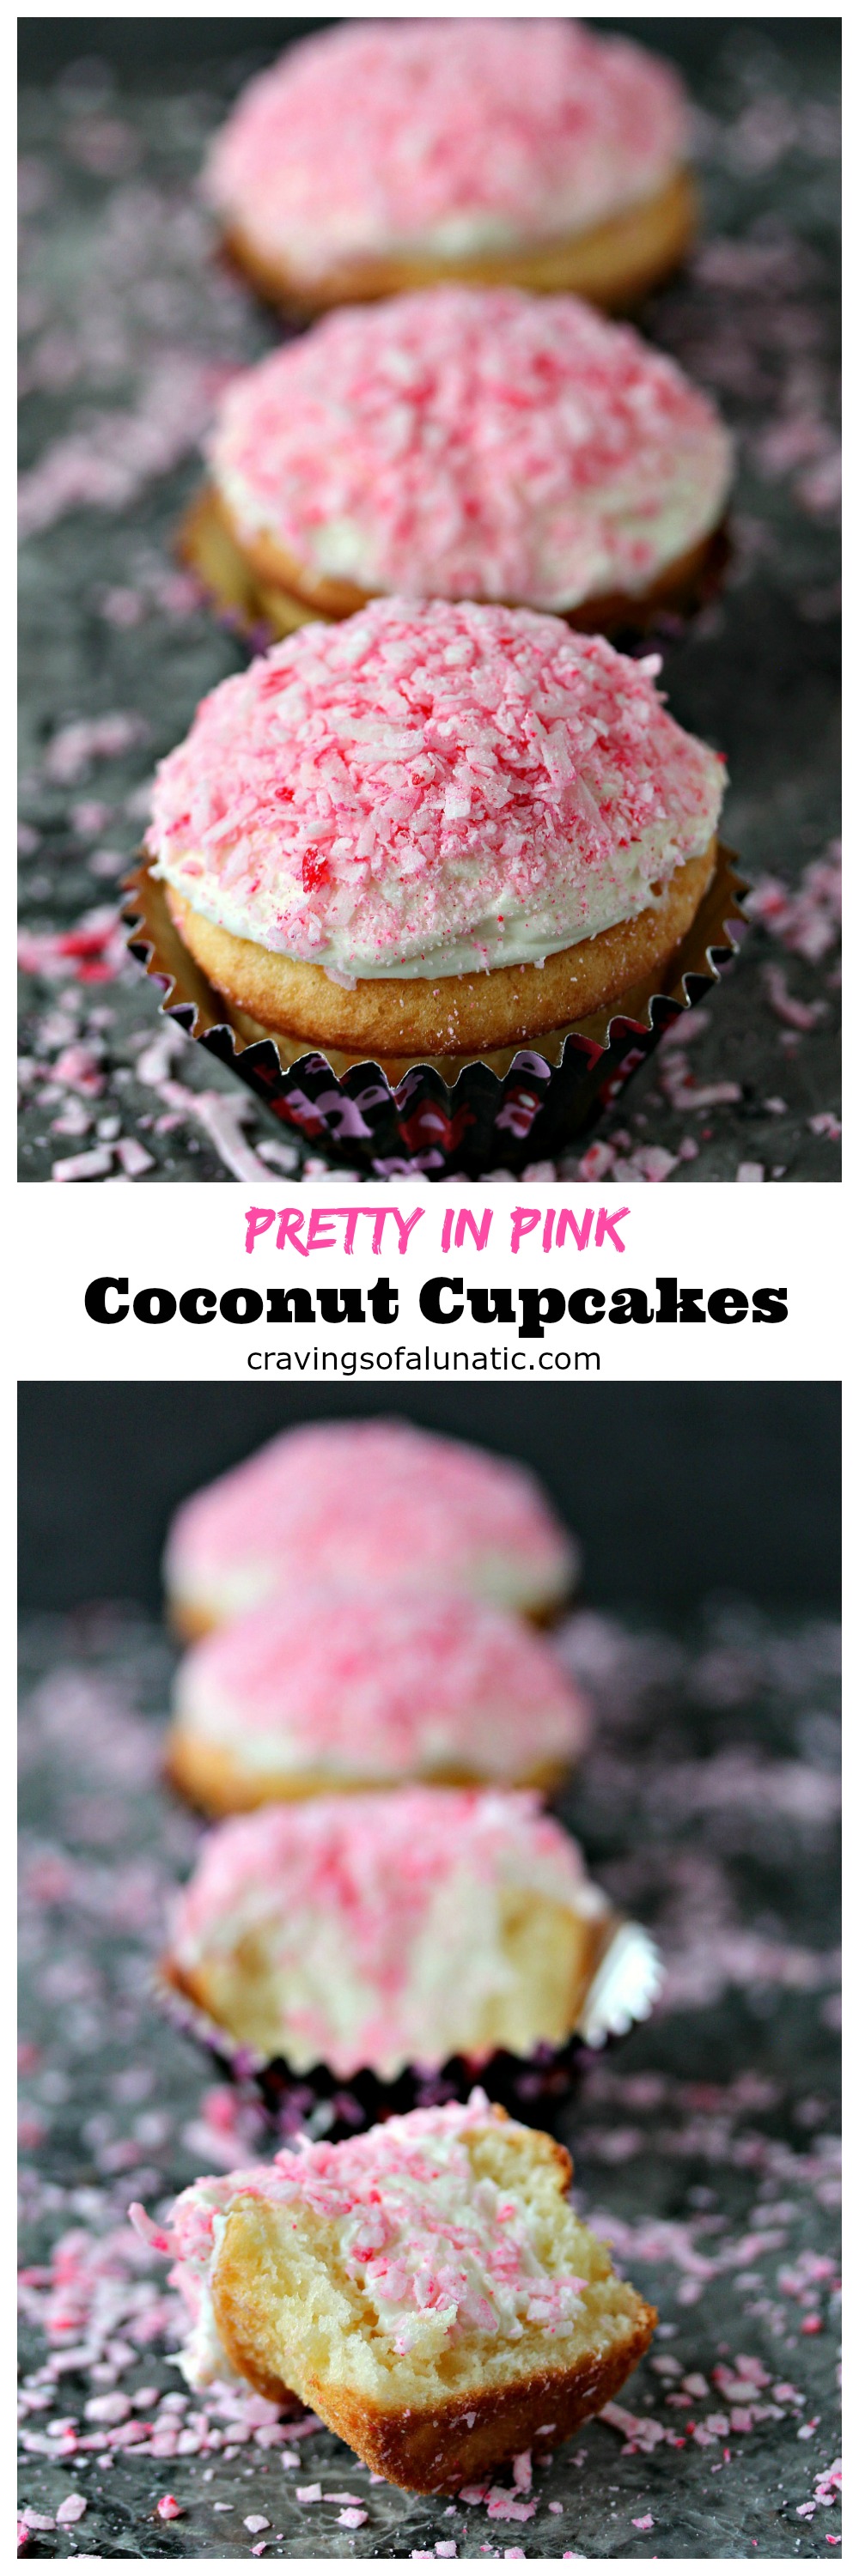 Pink Coconut Cupcakes from cravingsofalunatic.com- Pink Coconut Cupcakes made with Pillsbury Cake Mix, then filled with surprise inside coconut frosting, and topped with pink coconut. (@CravingsLunatic)